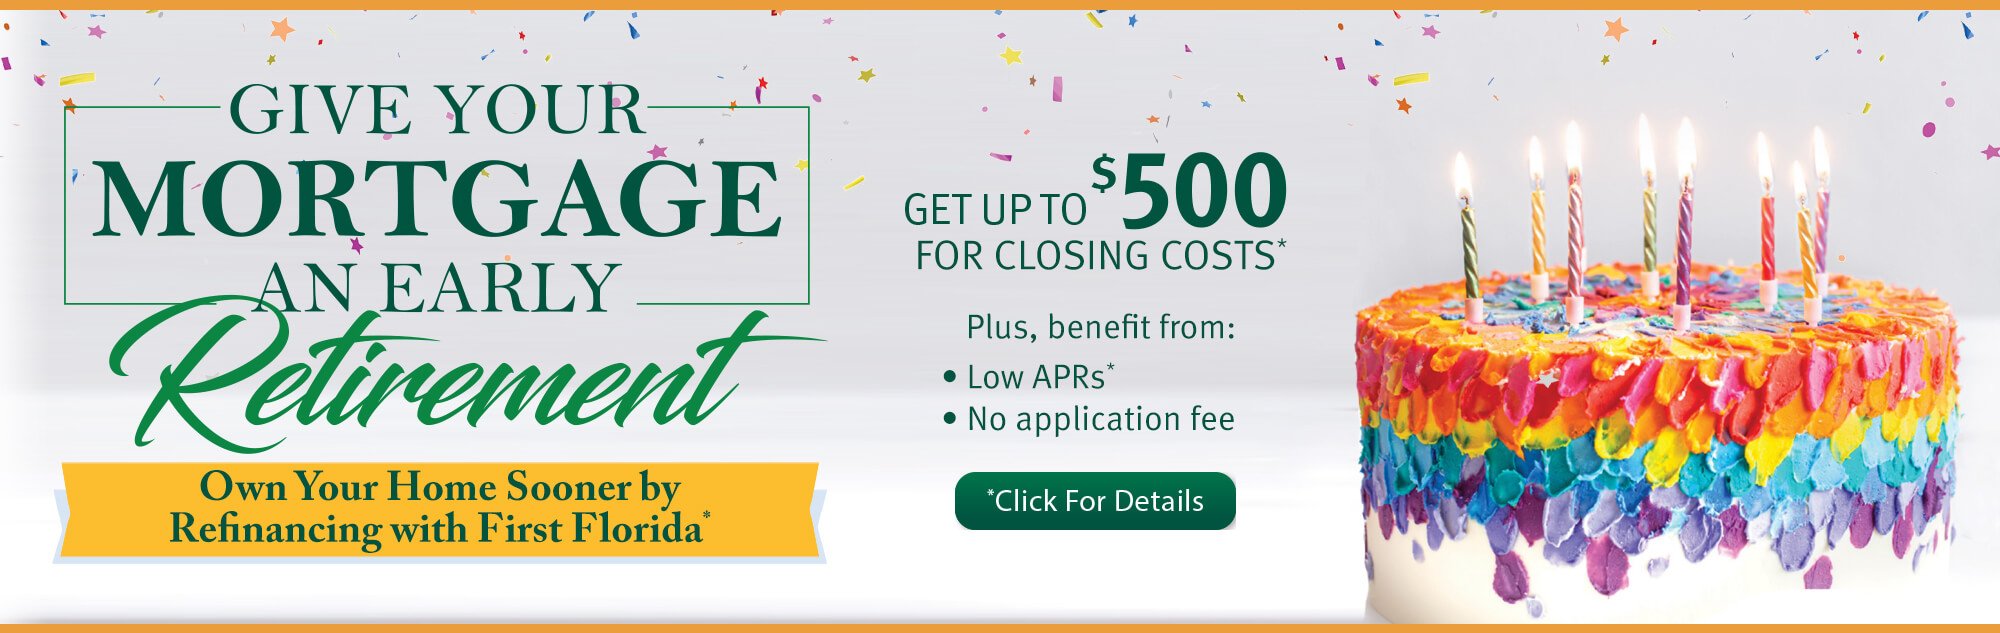 First Florida gives you the freedom to retire your biggest financial commitment earlier.